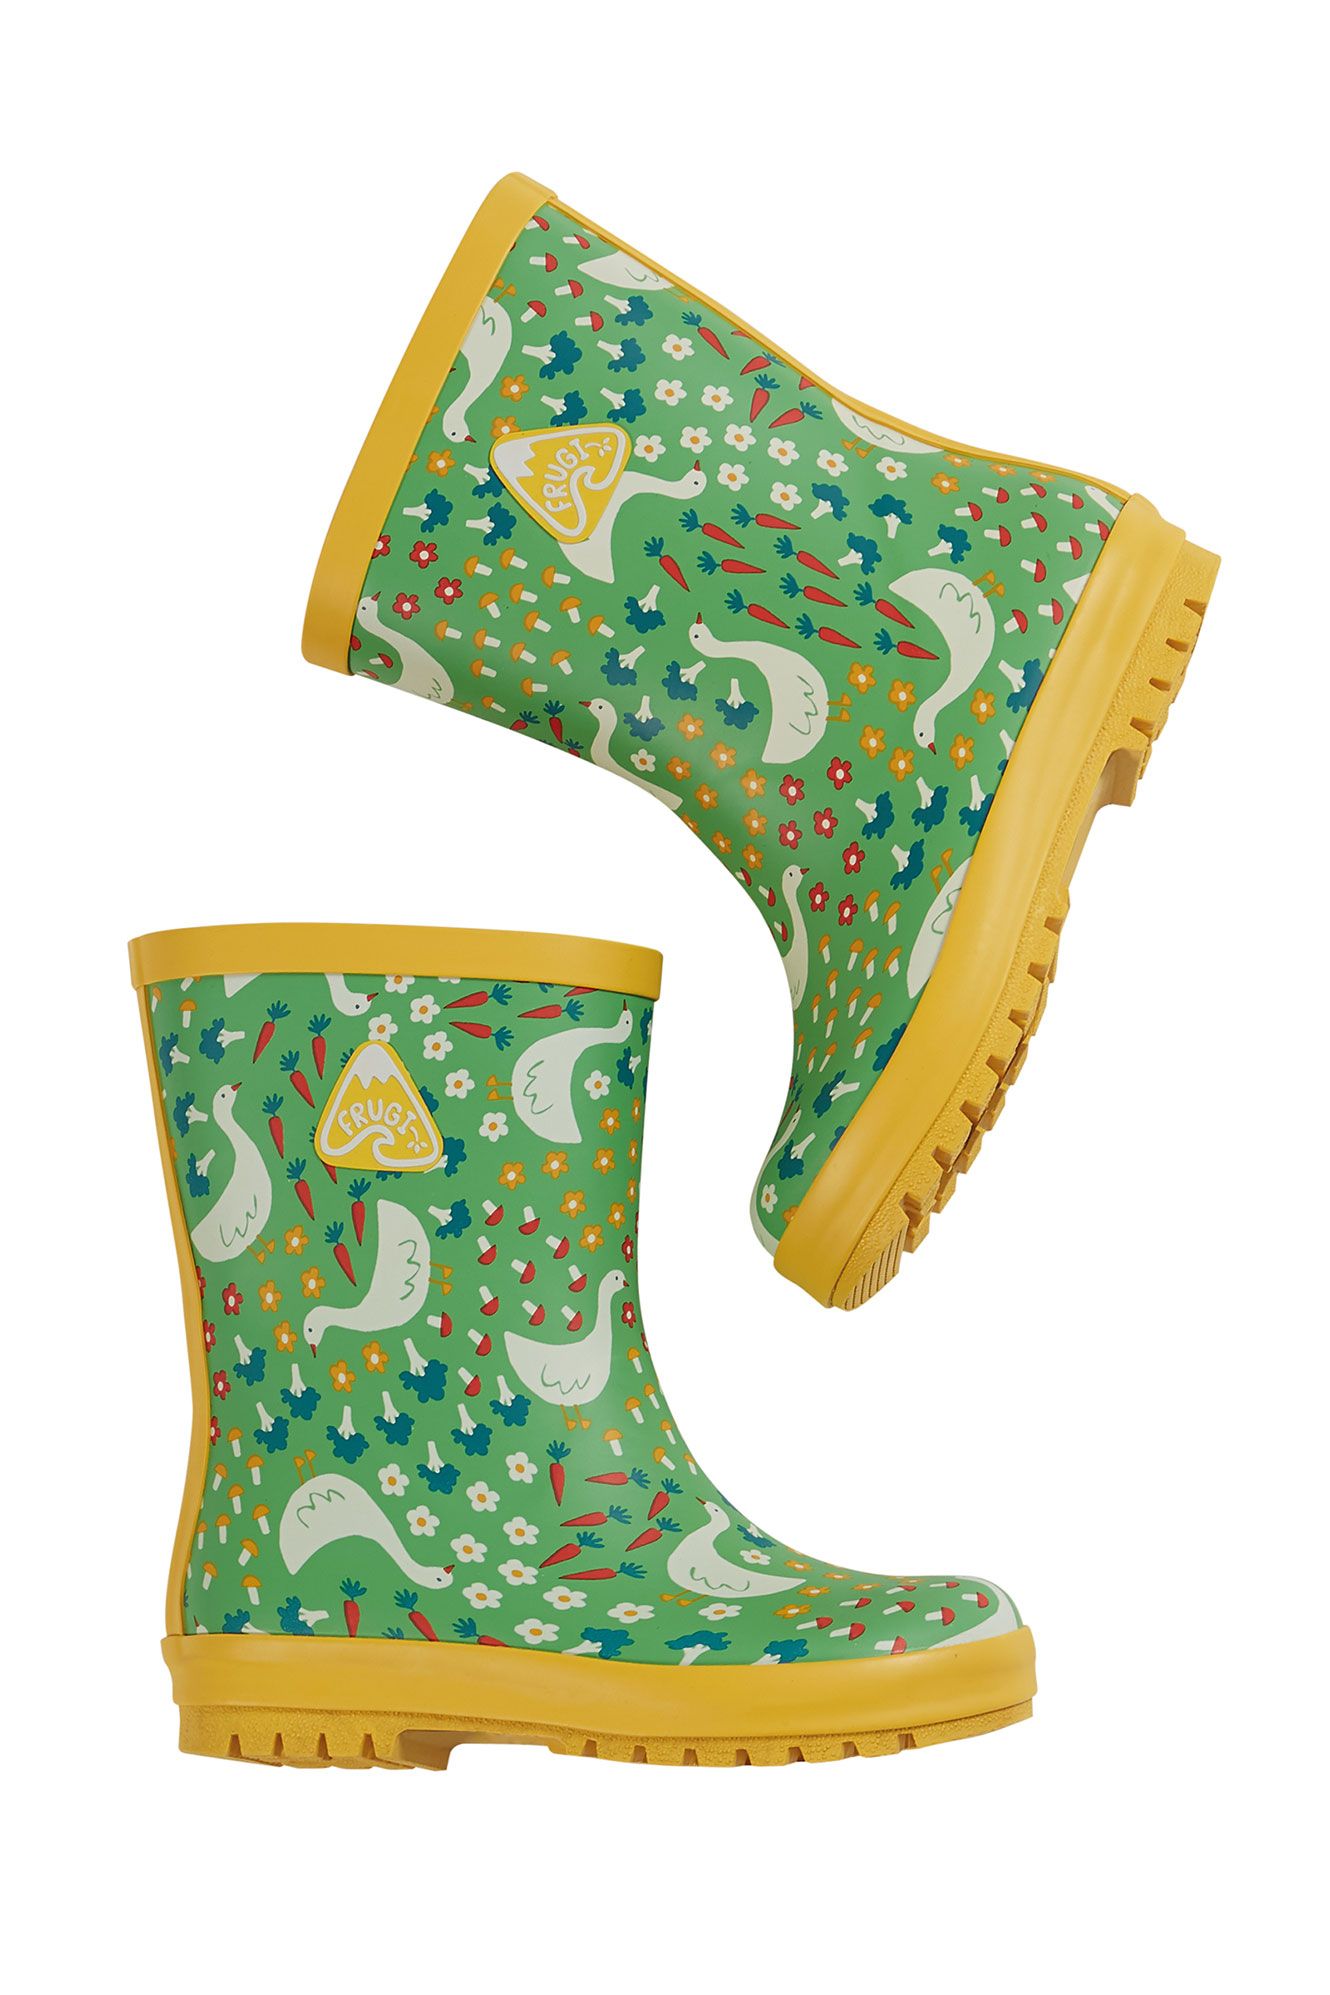 Puddle Buster Wellington Boots